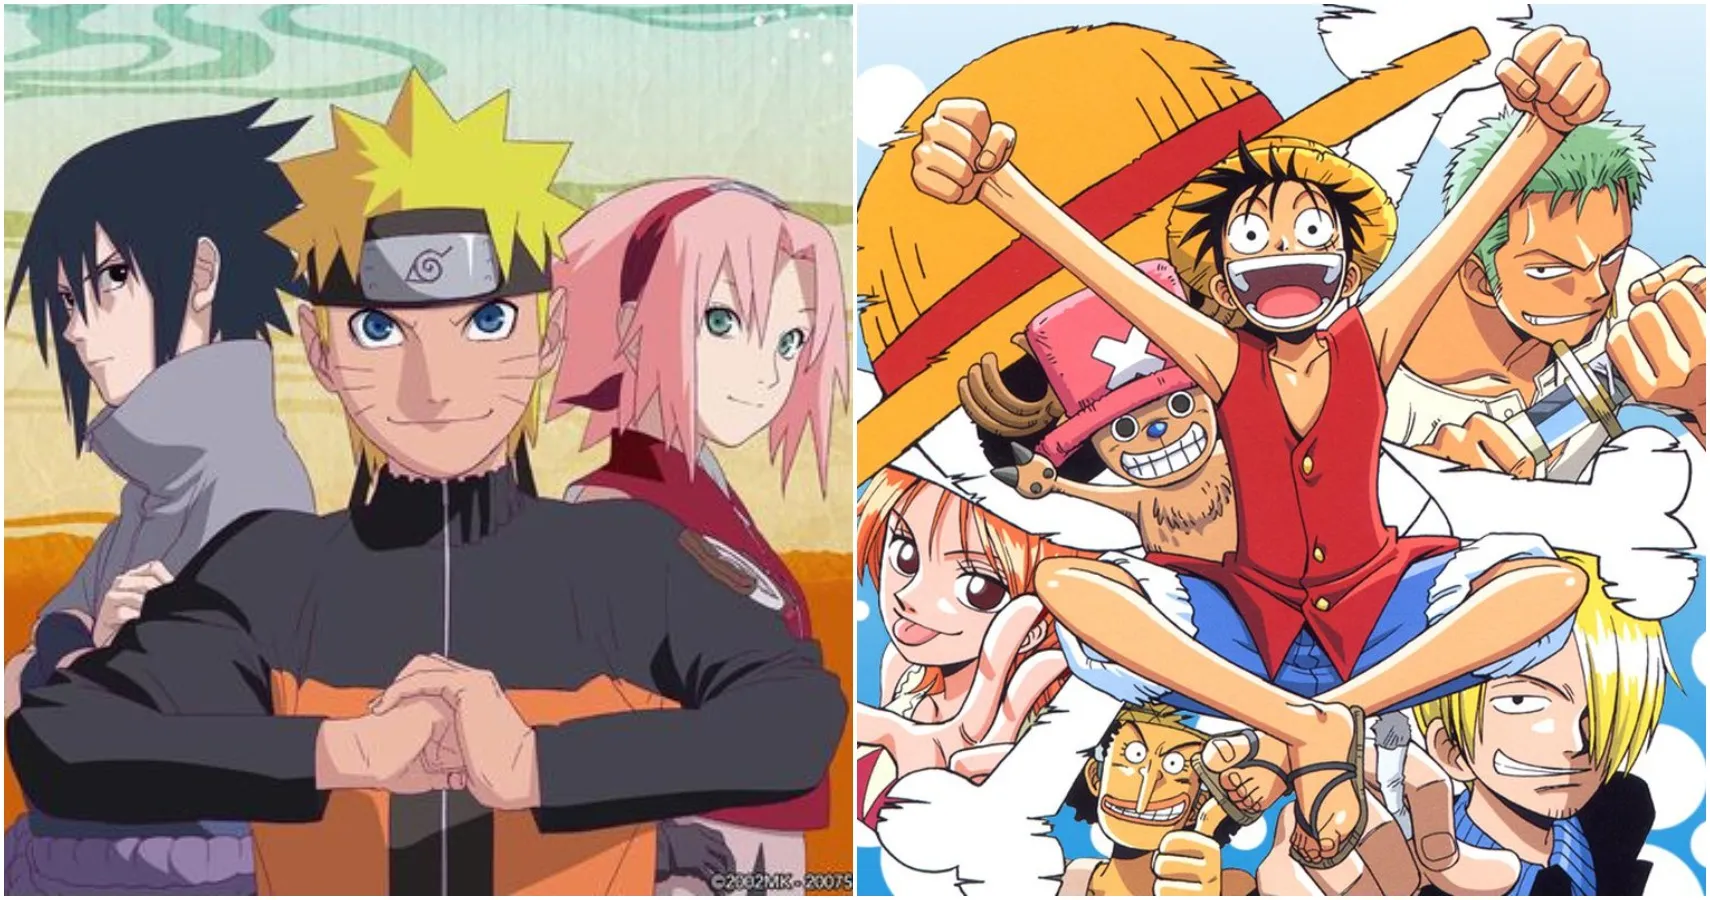 Ultimate Showdown Why Fans Love Naruto and One Piece in the Anime World-